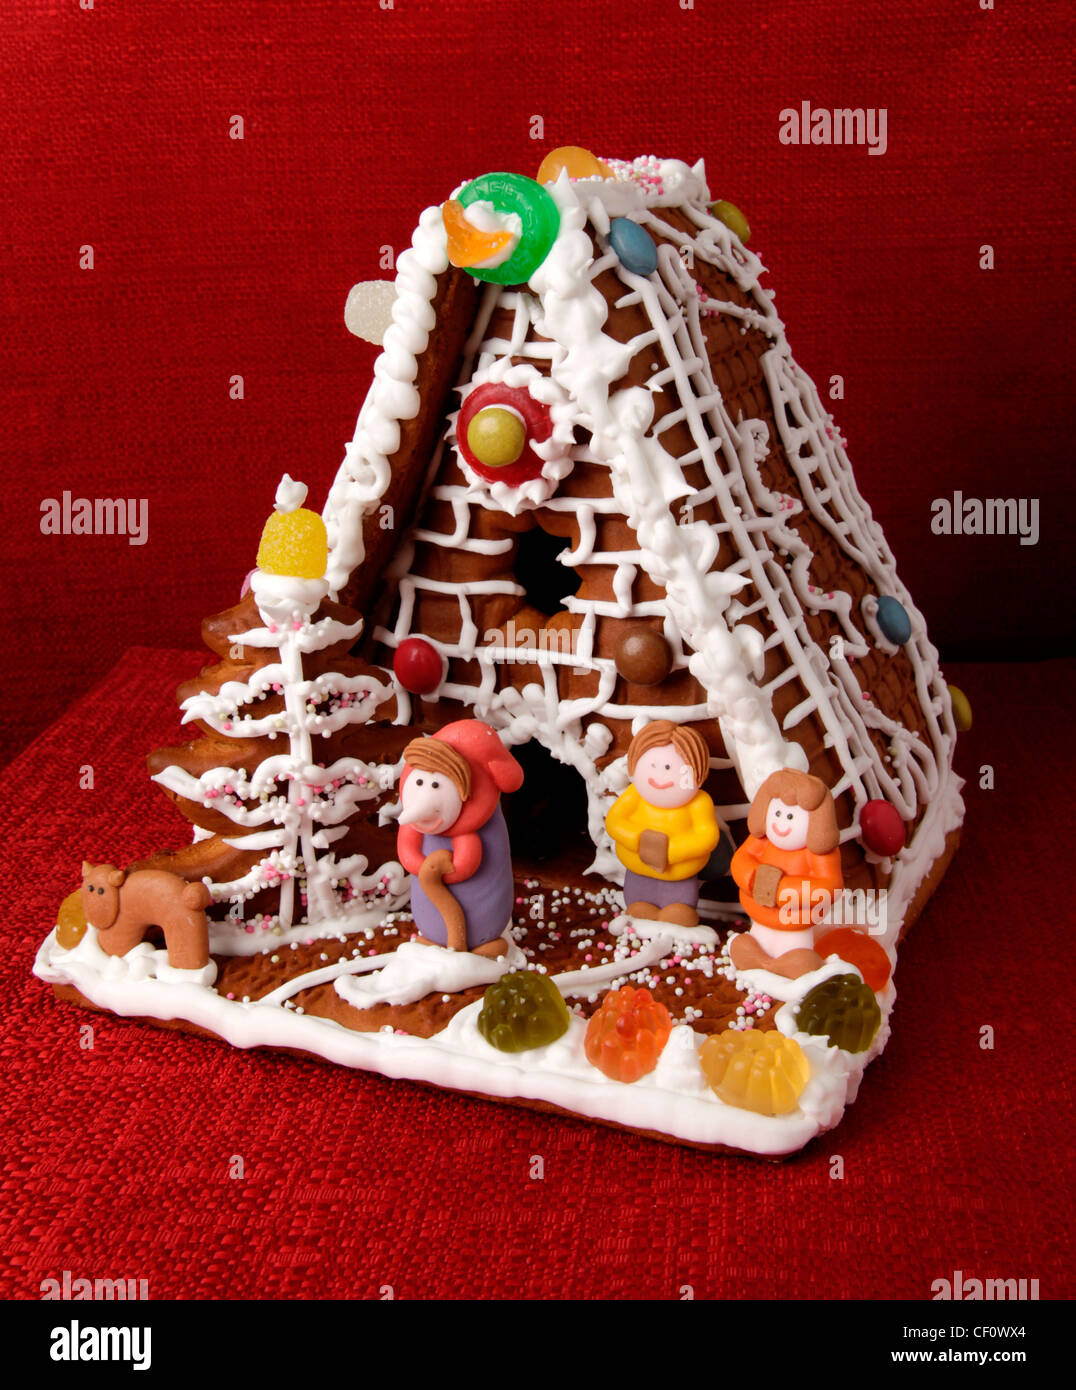 GINGERBREAD HOUSE Stock Photo